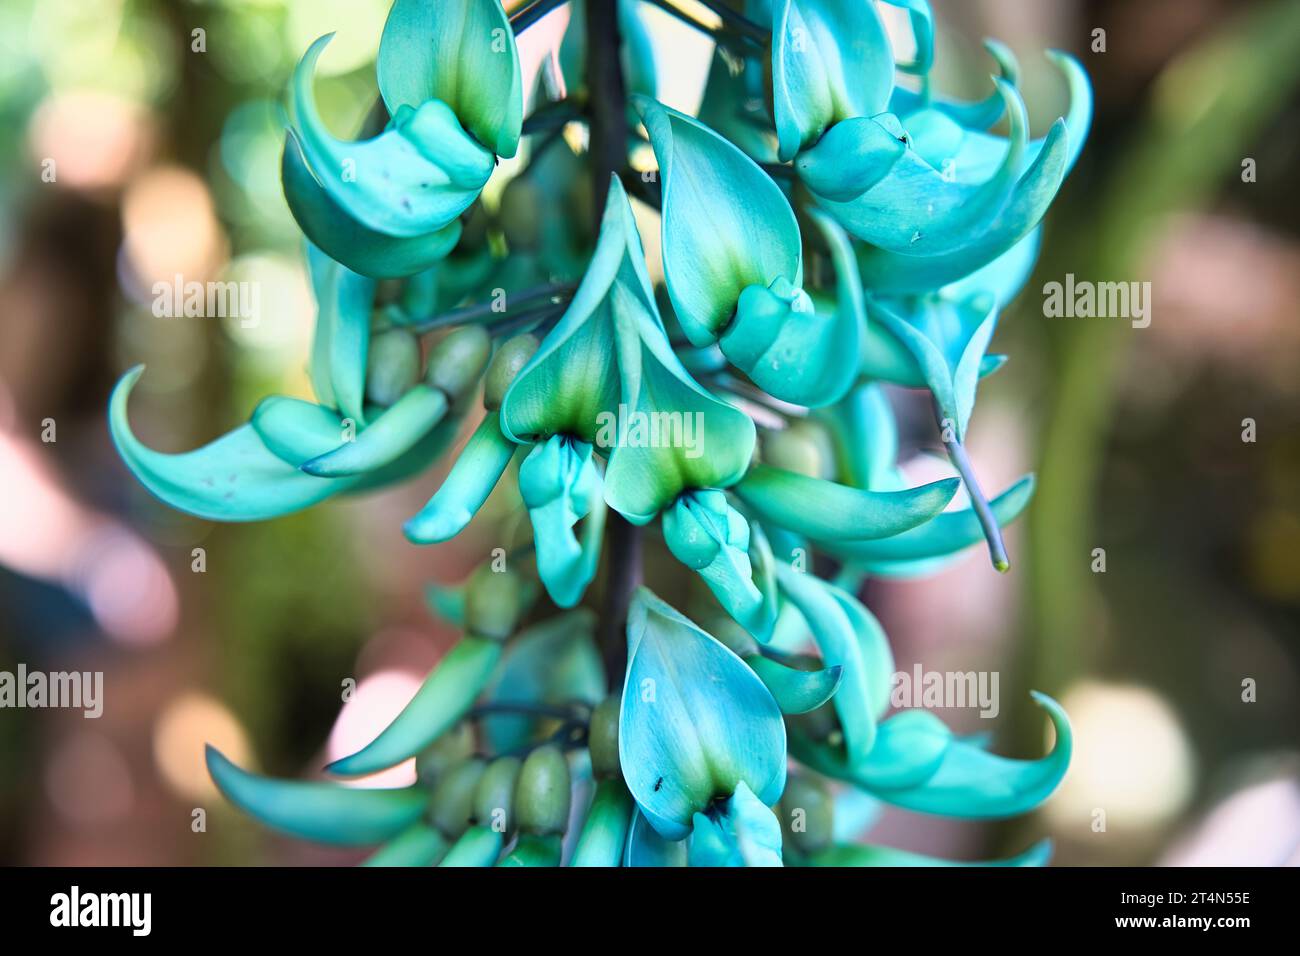 Strongylodon macrobotrys, commonly known as jade vine, emerald vine or turquoise jade vine, is a species of leguminous perennial liana endemic Stock Photo